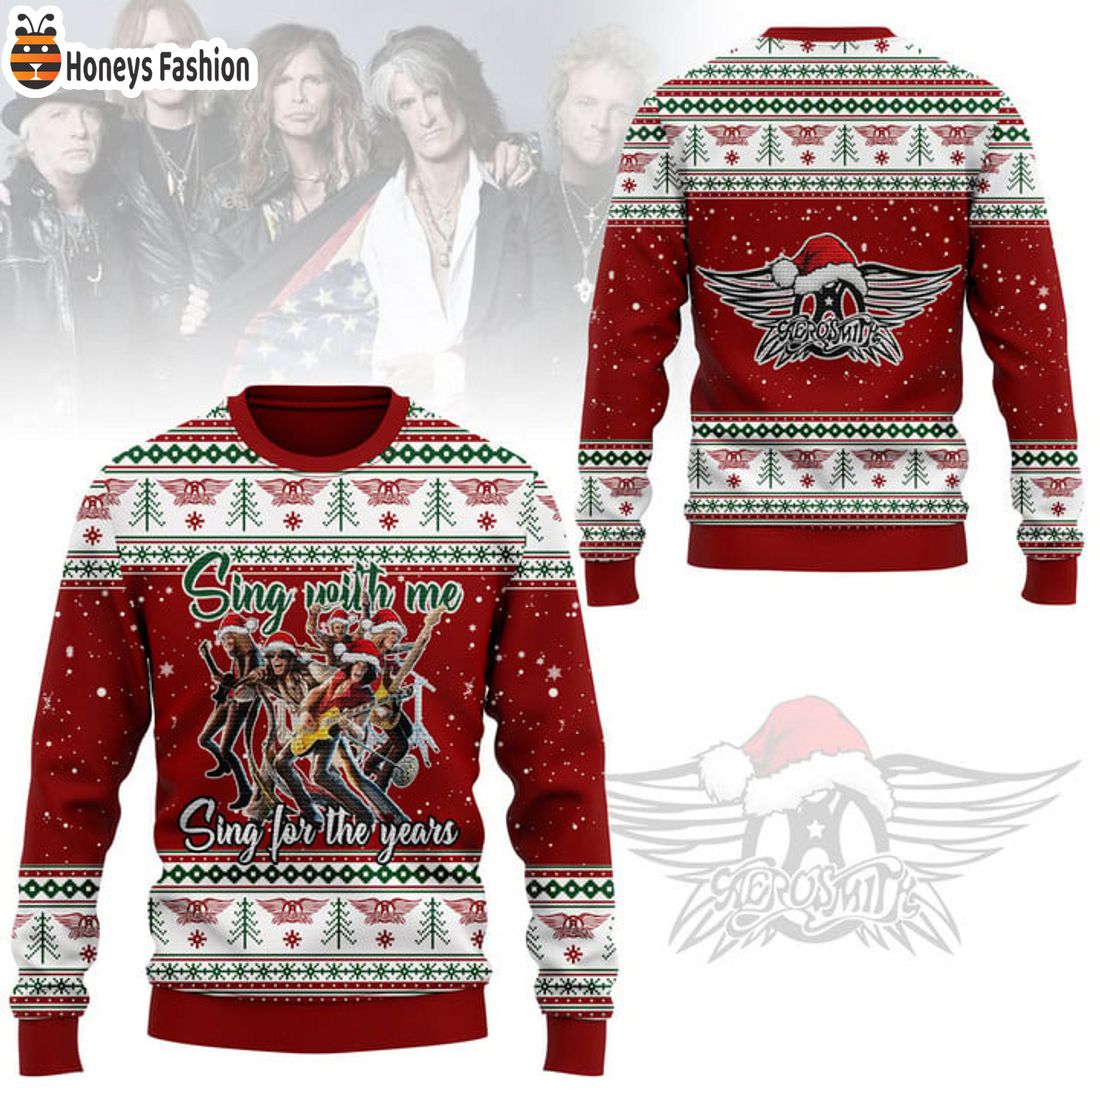 HOT Aerosmith Sing With Me Sing For The Years Ugly Christmas Sweater